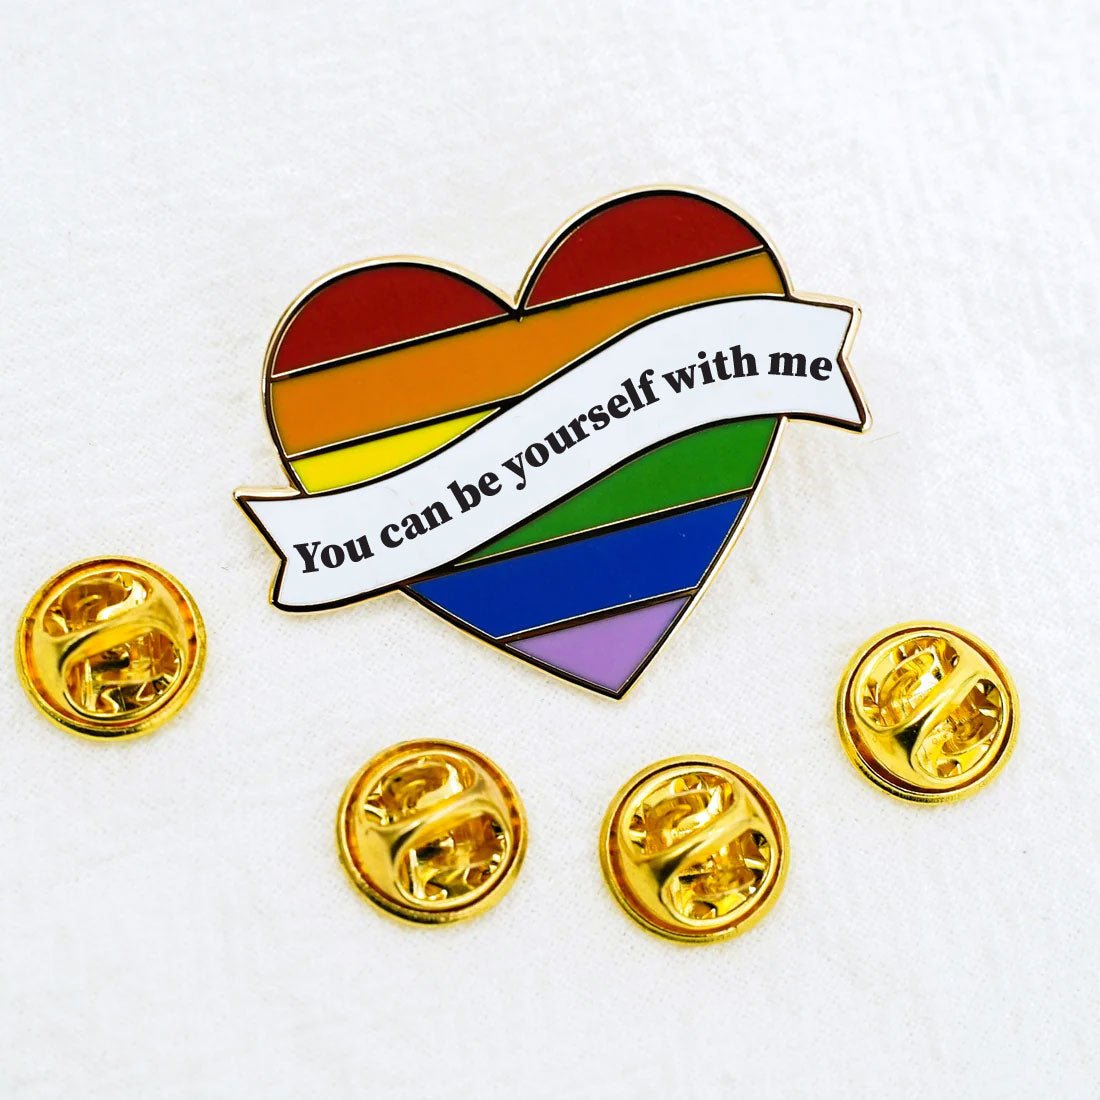 You can be yourself with me - Inclusive Enamel Pin - PrideBooth